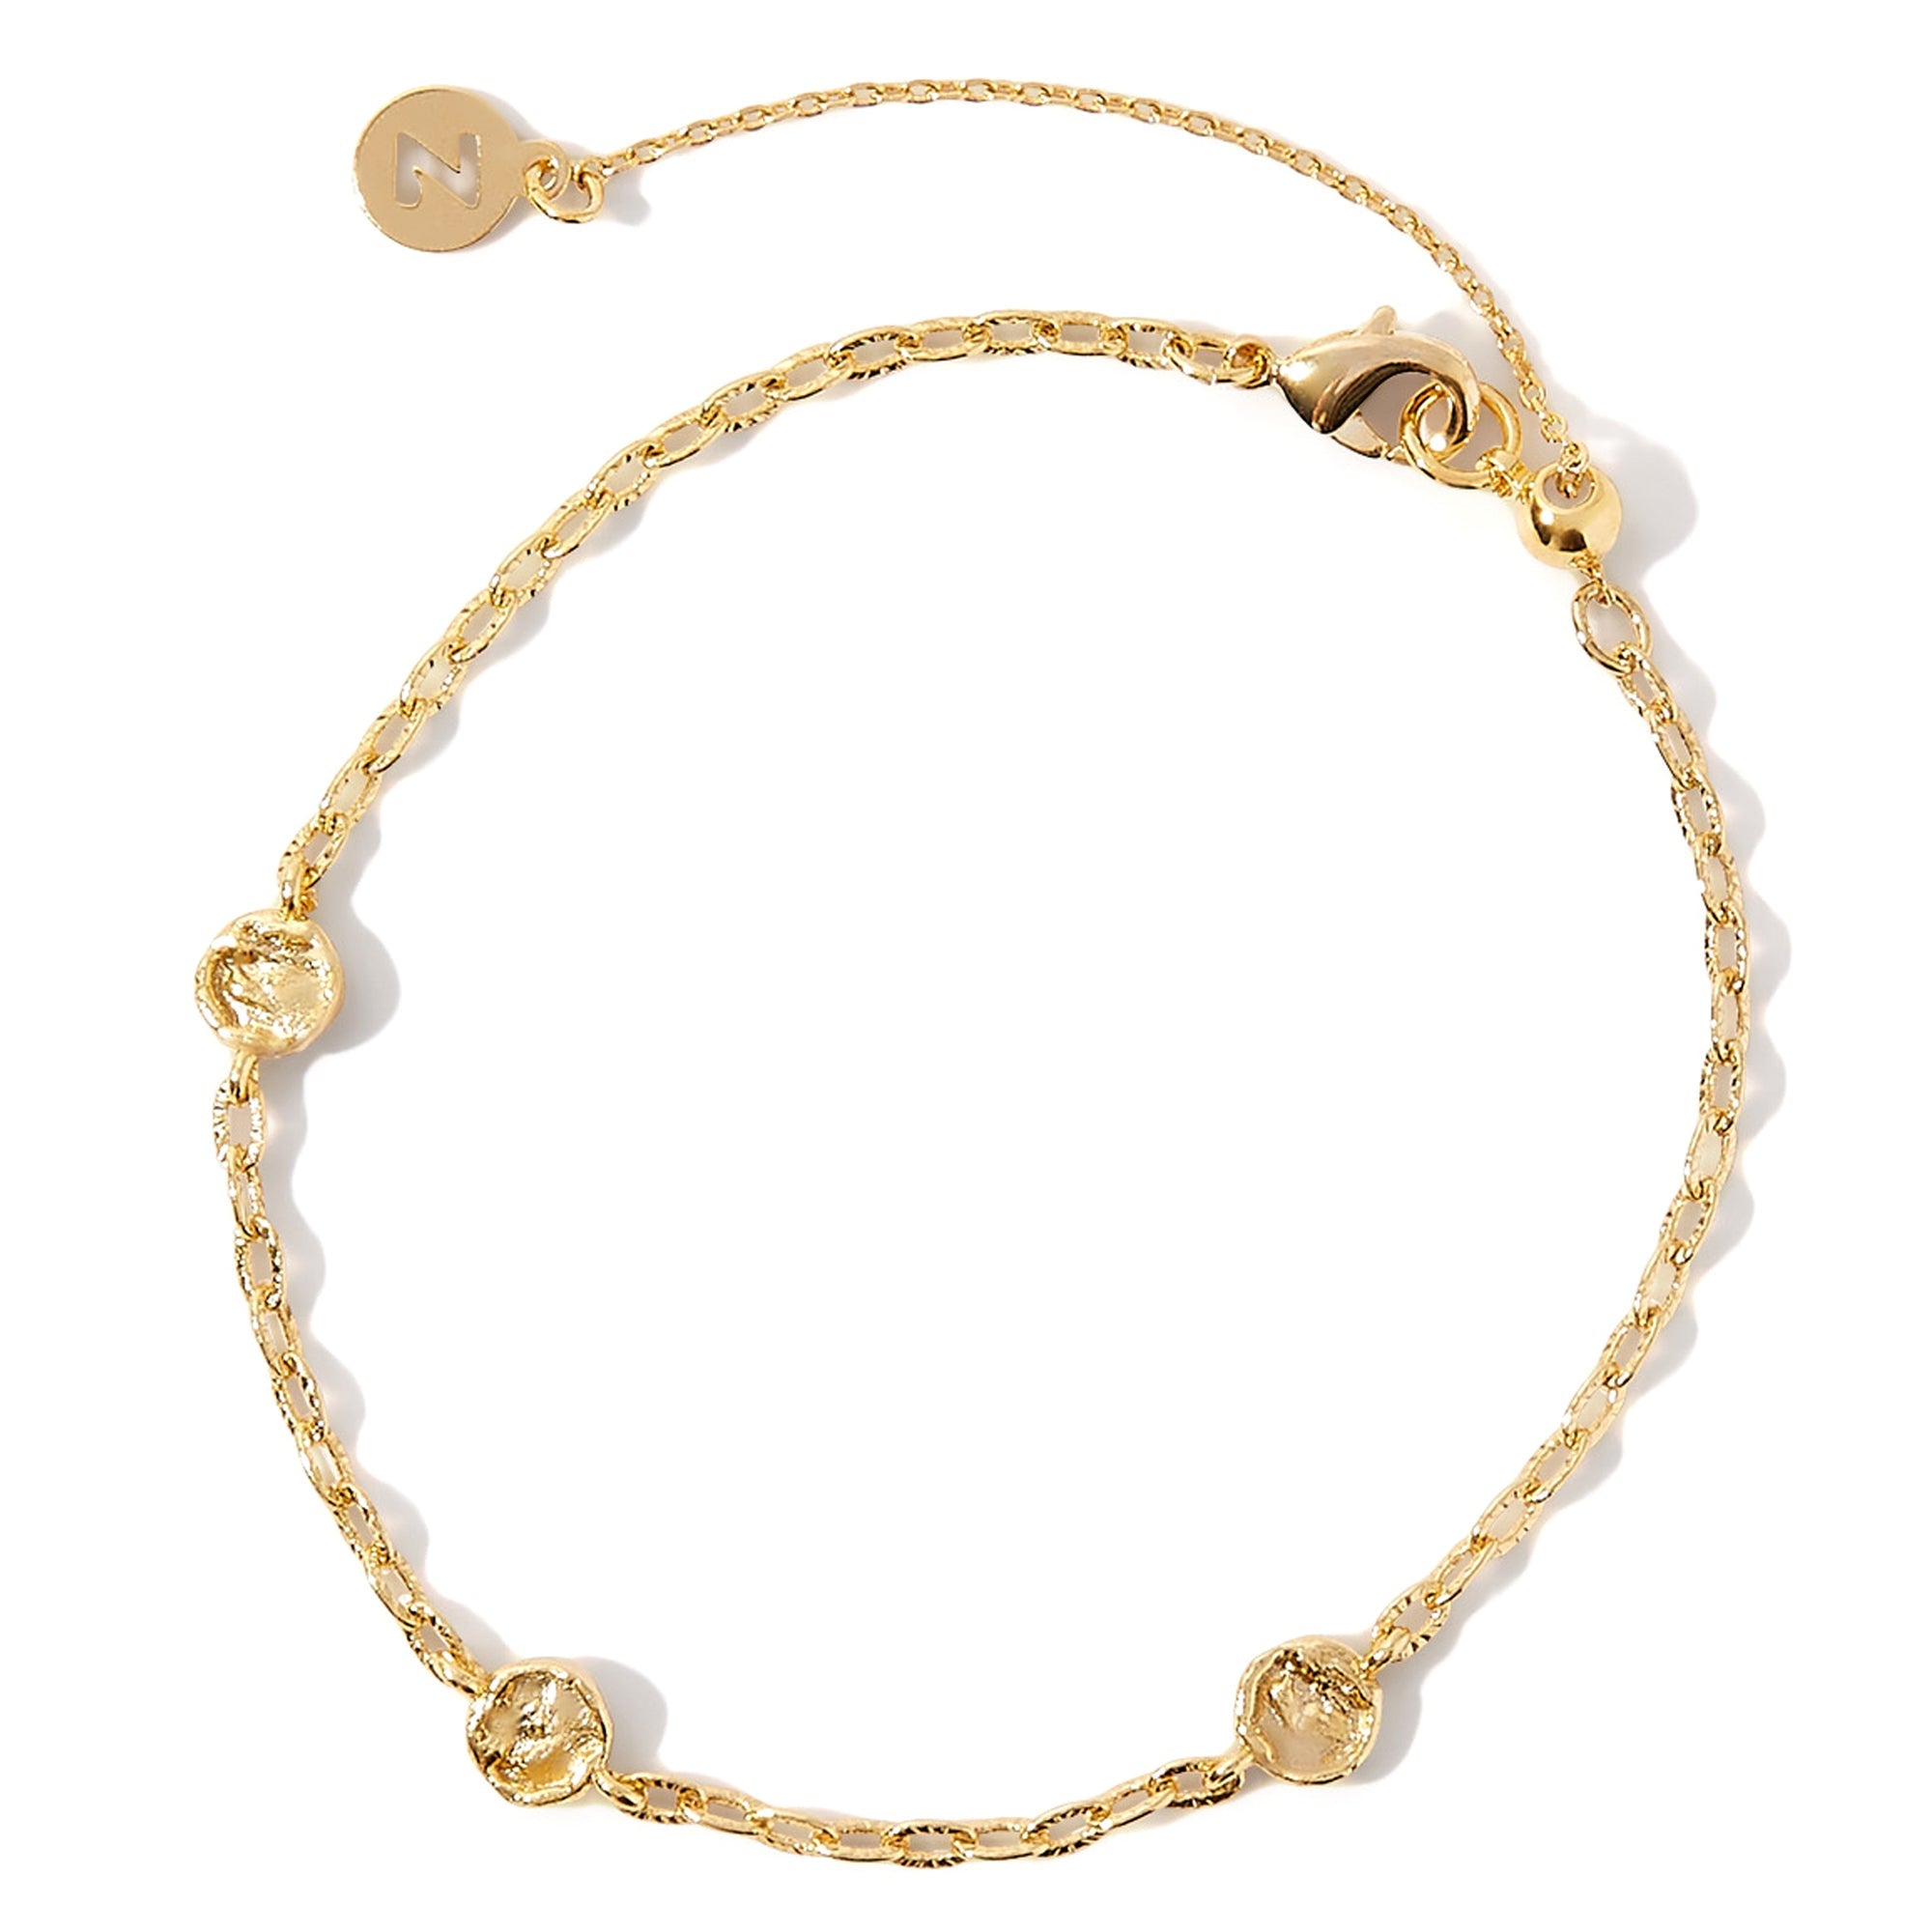 Real Gold Plated Z Texture Coin Station Bracelet For Women By Accessorize London